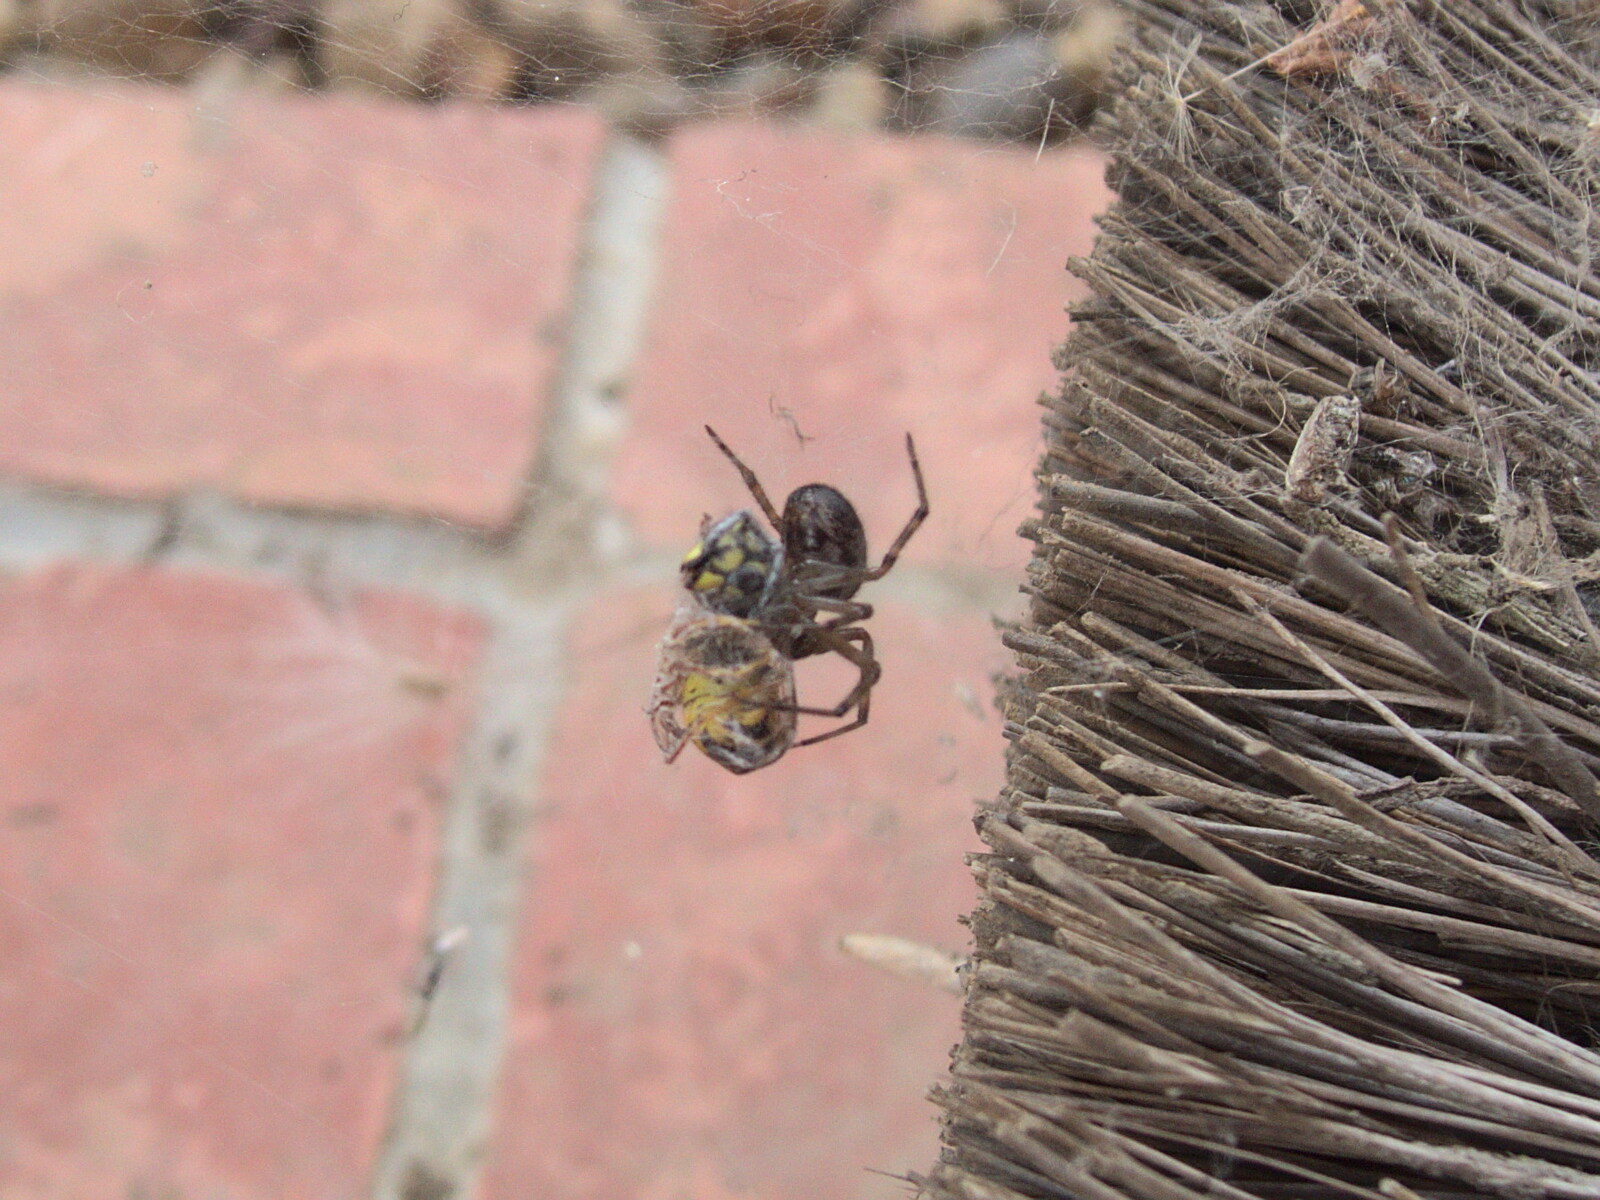 A July Miscellany, Diss, Eye and Norwich - 23rd July 2022: A spider wraps up its wasp victim